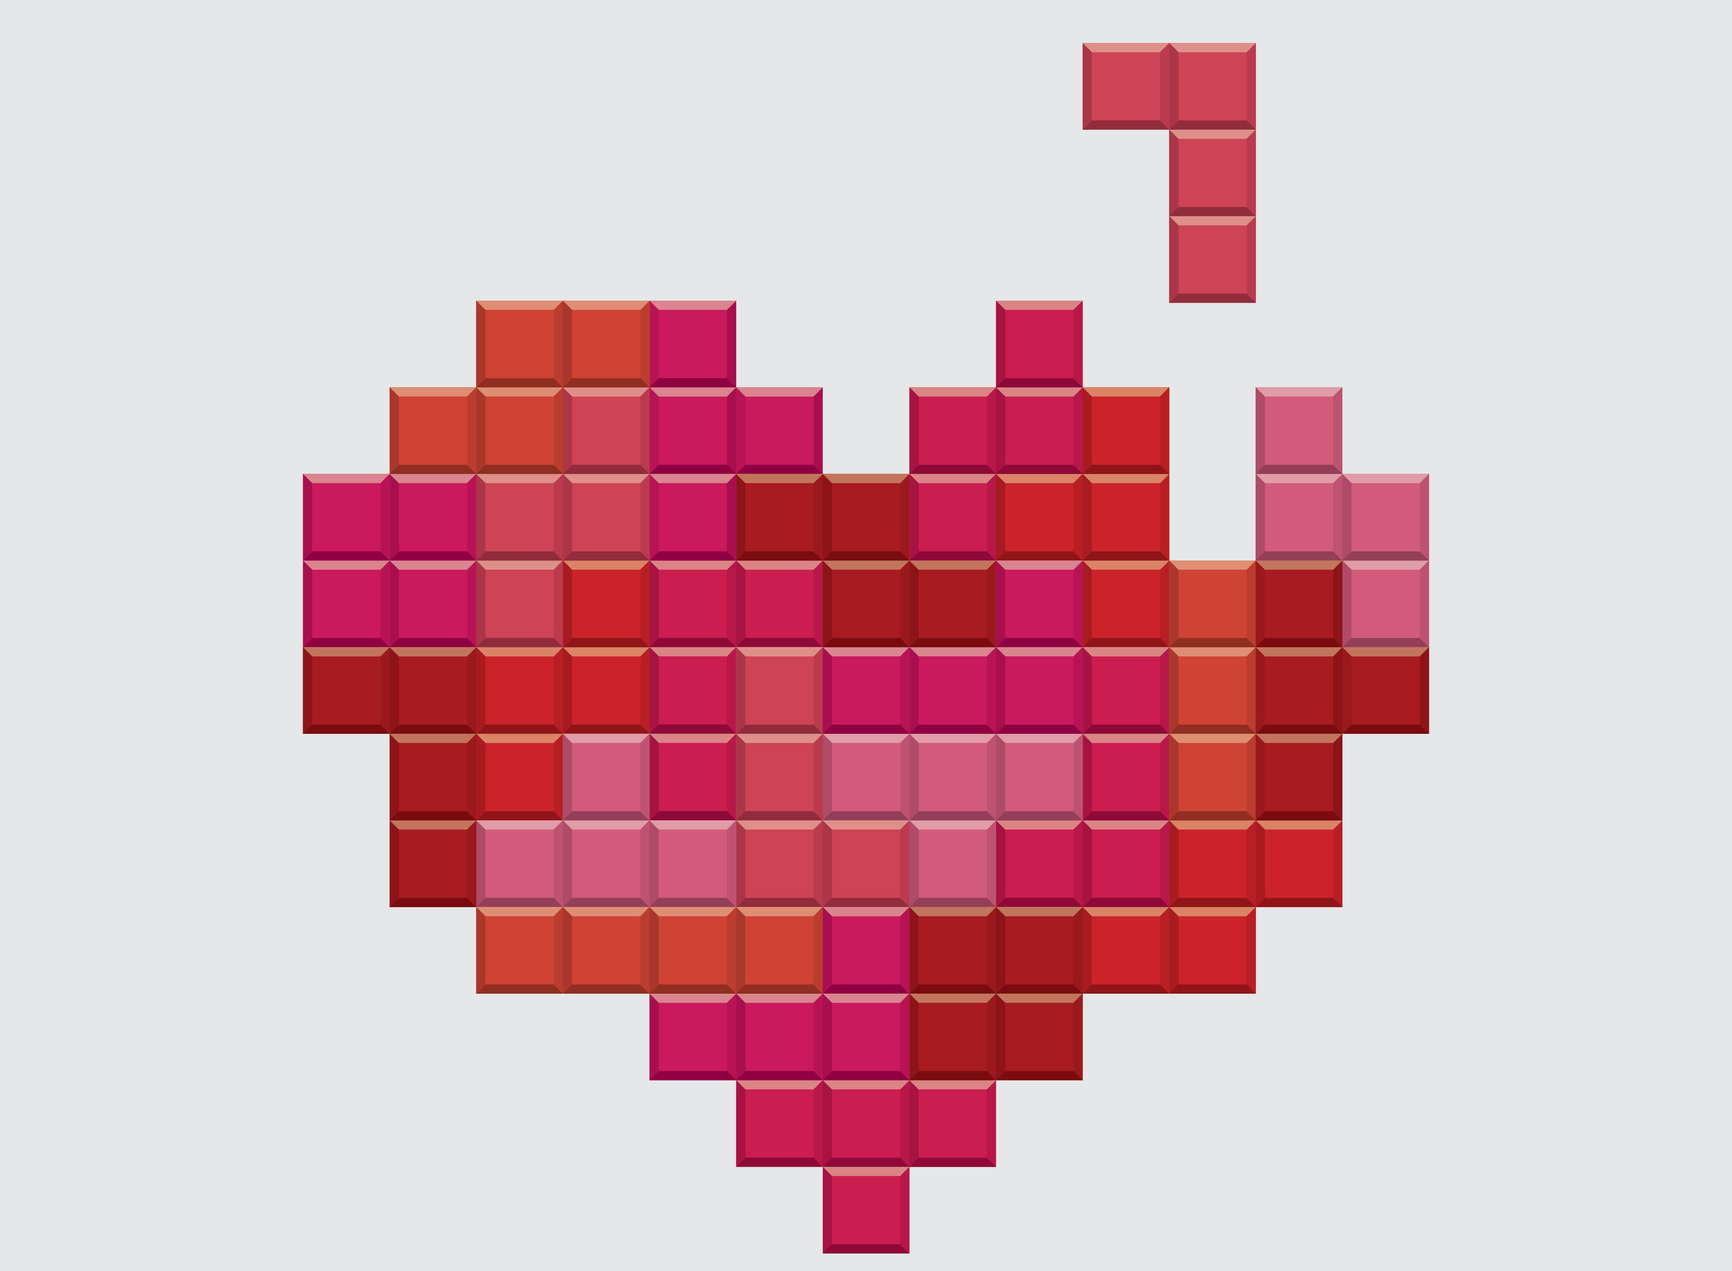 Valentines day card. Video game pixel red heart. Retro vintage design. Editable vector.